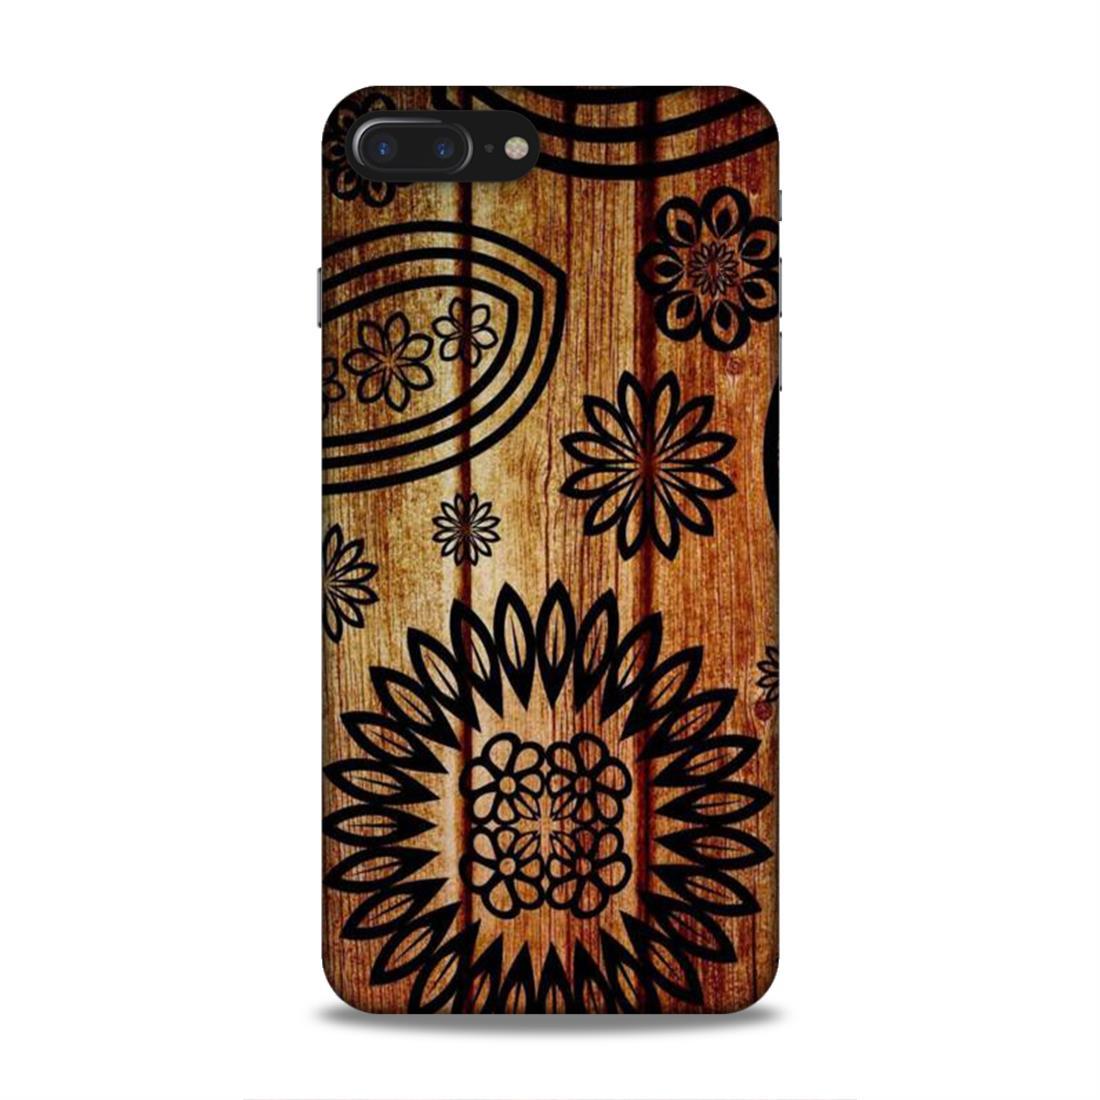 Wooden Look Pattern iPhone 8 Plus Mobile Case Cover